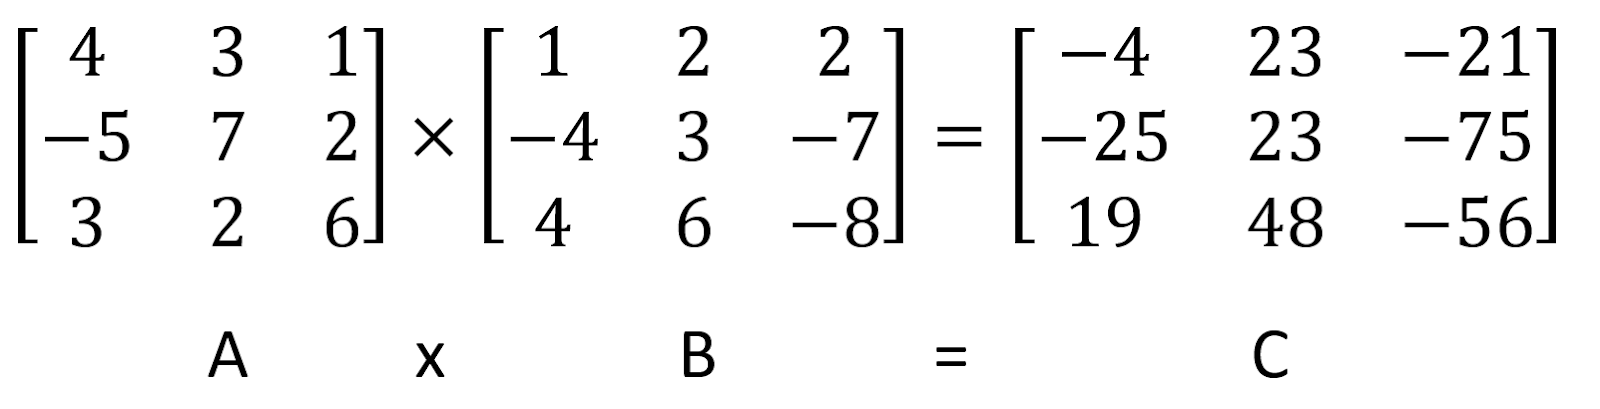 How to Multiply Matrices